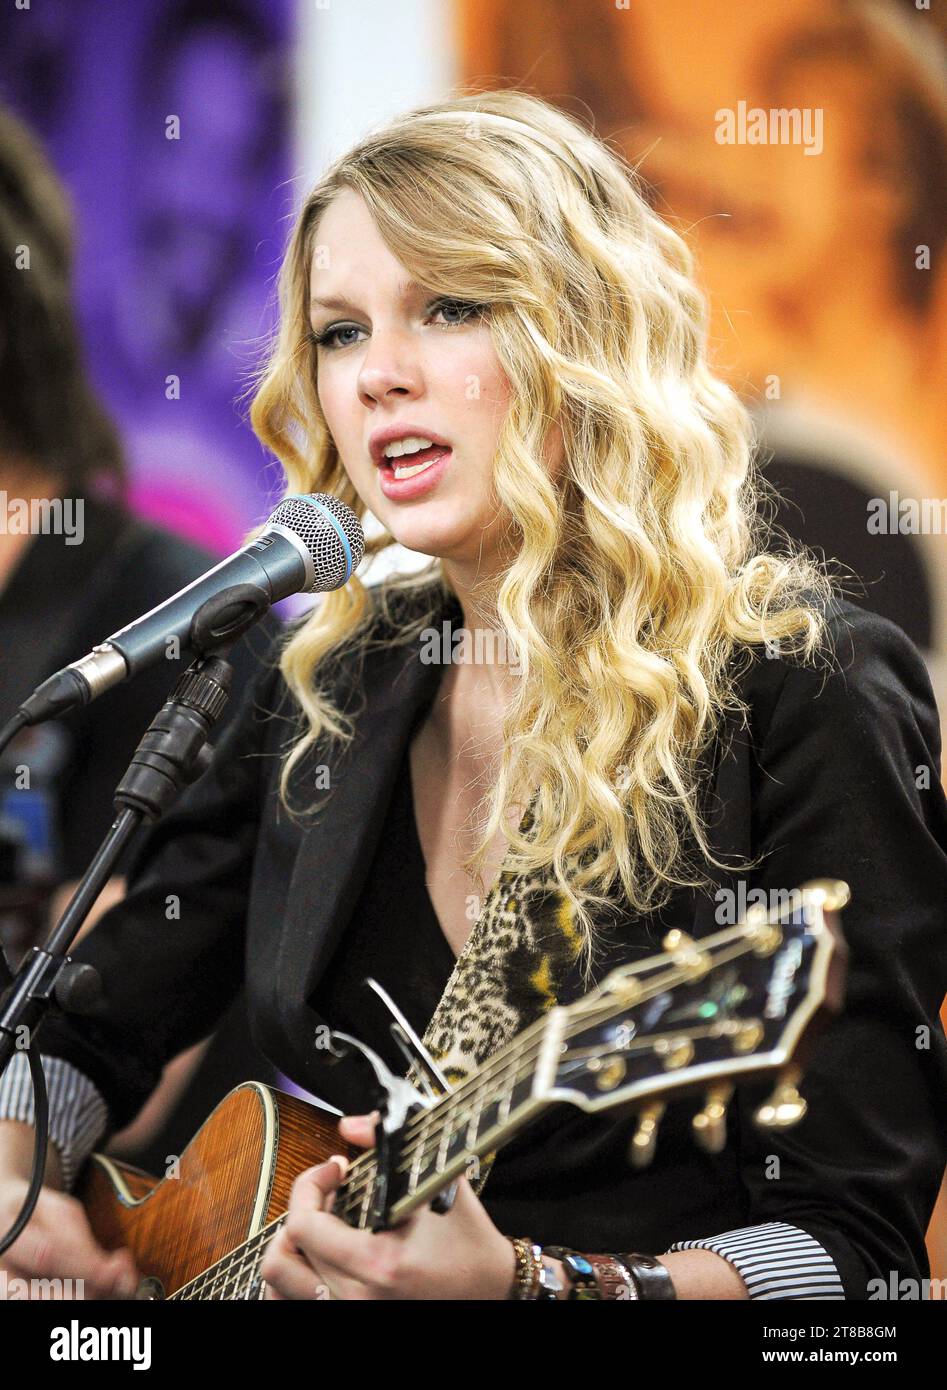 Taylor Swift, aged 19, performs a small acoustic gig in Manchester, UK, February 19th 2009. Stock Photo